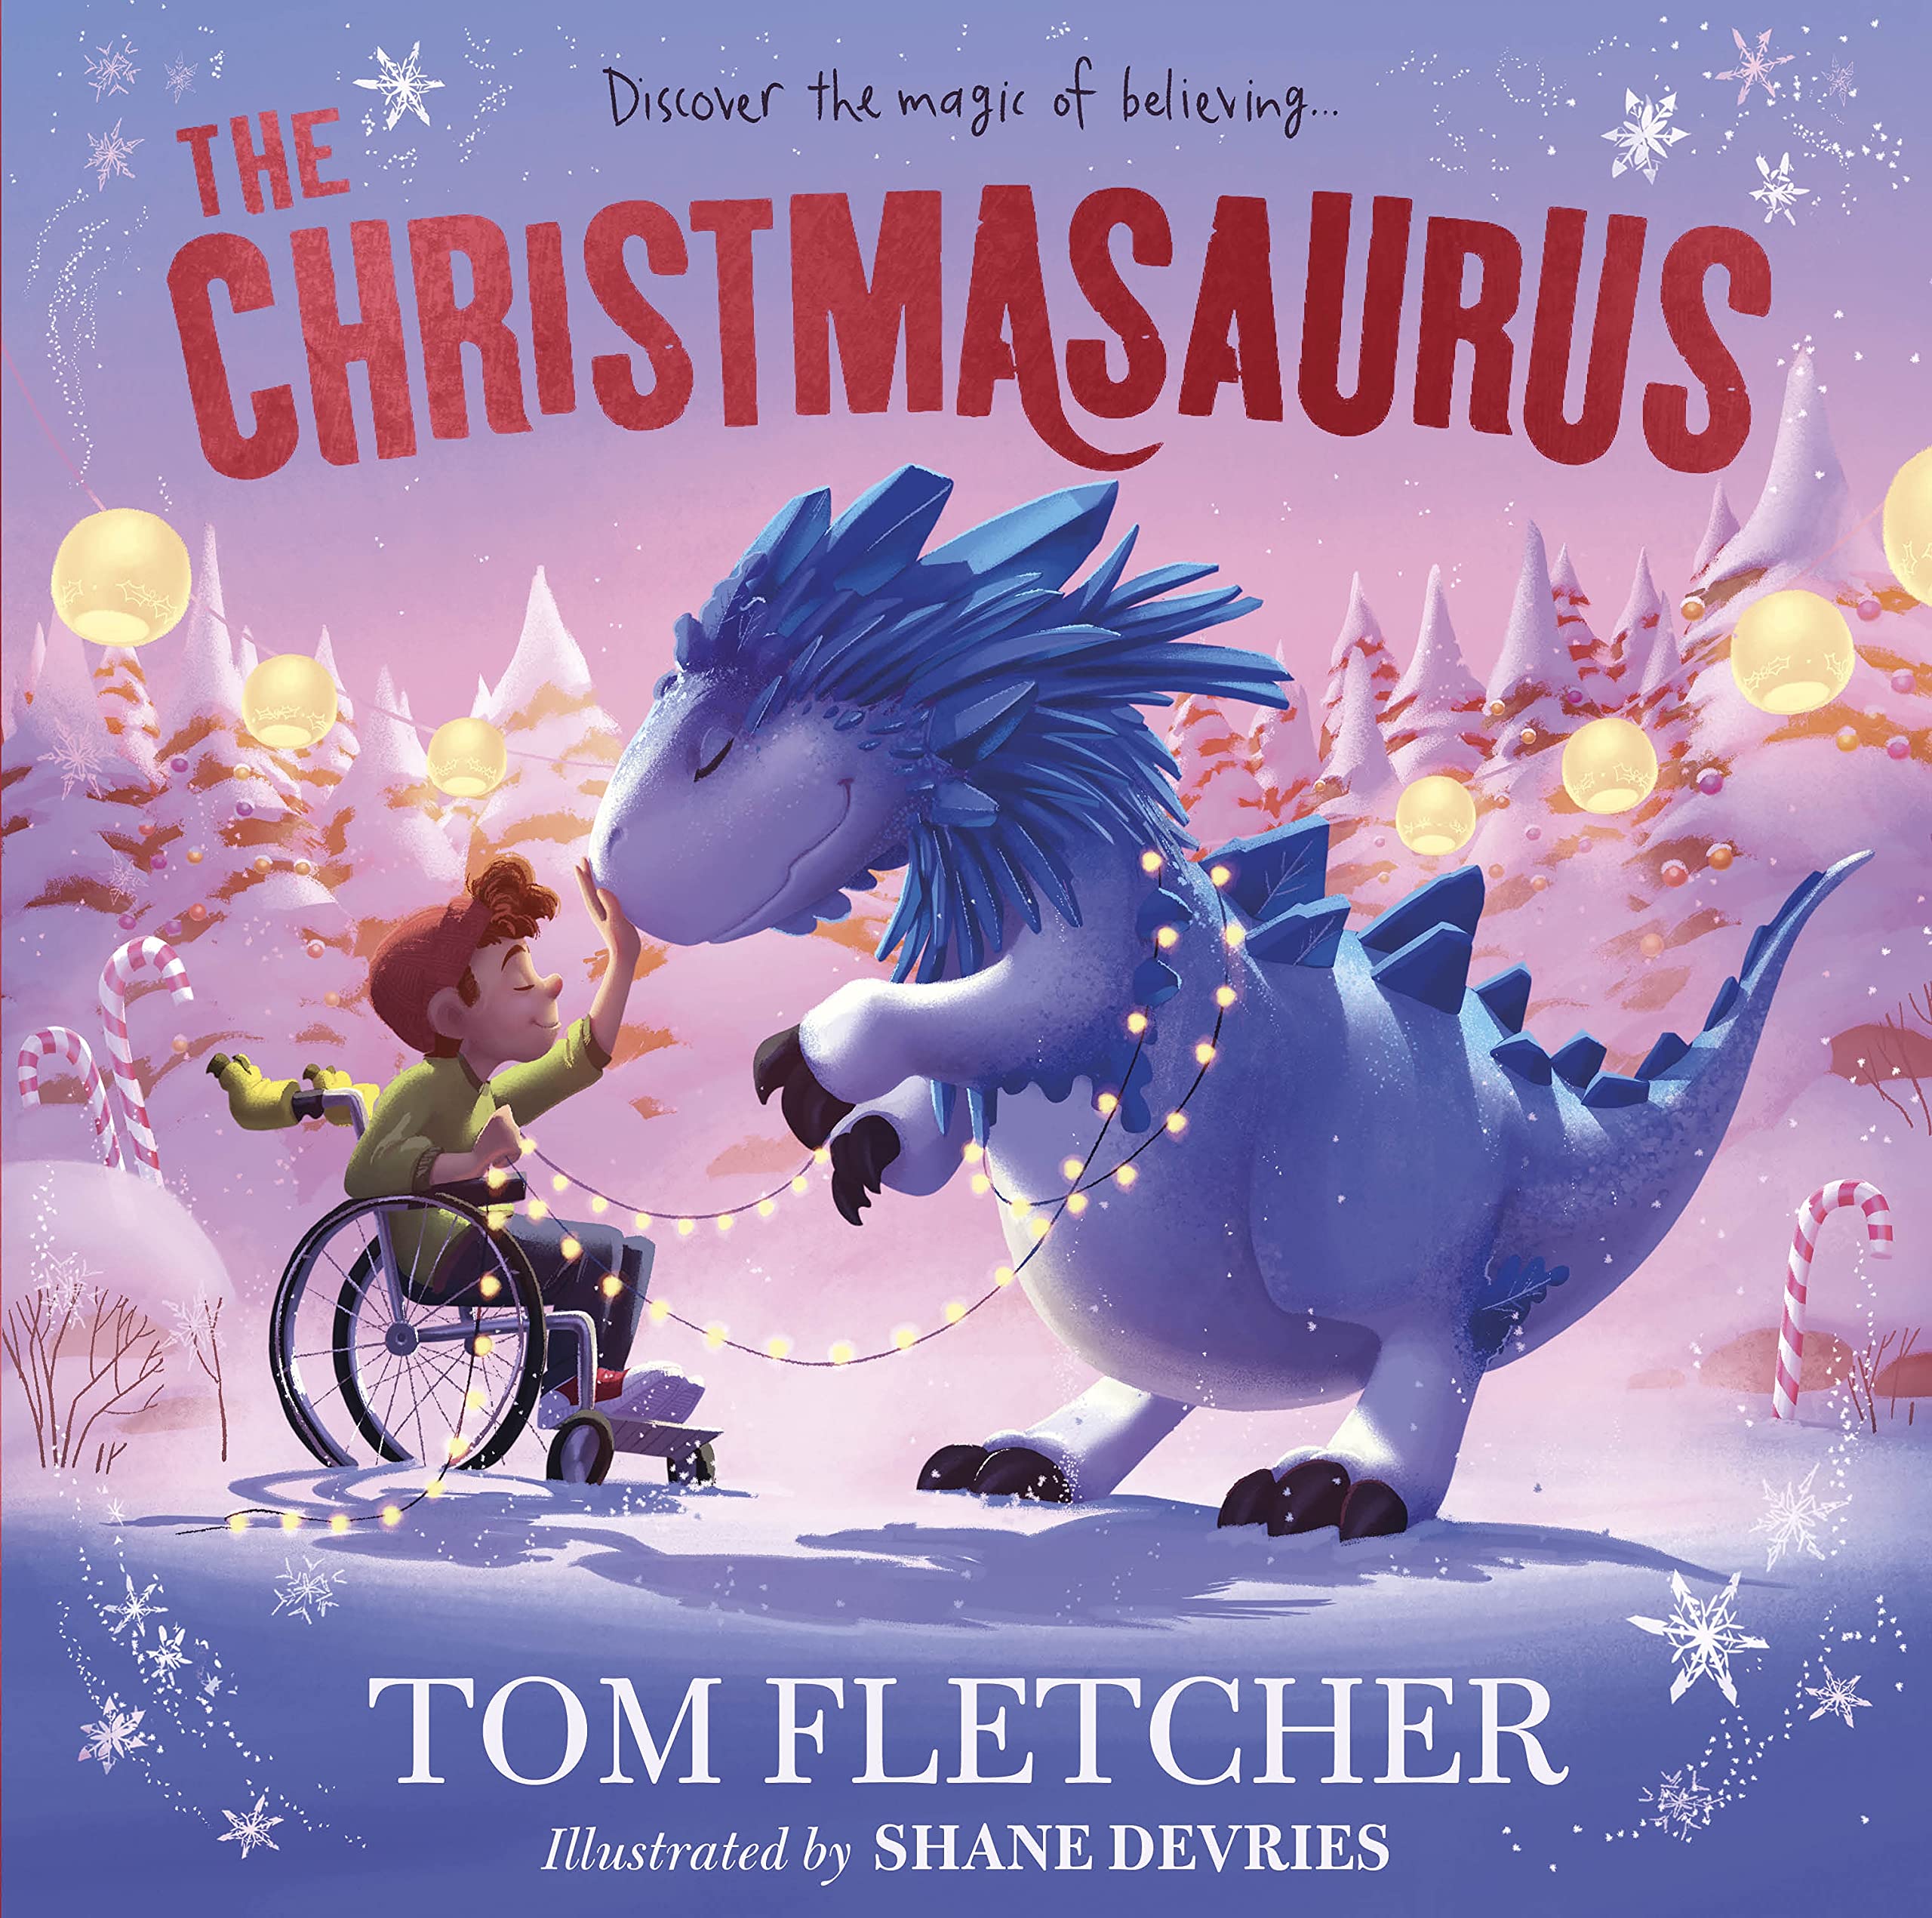 THE CHRISTMASAURUS - PICTURE BOOK